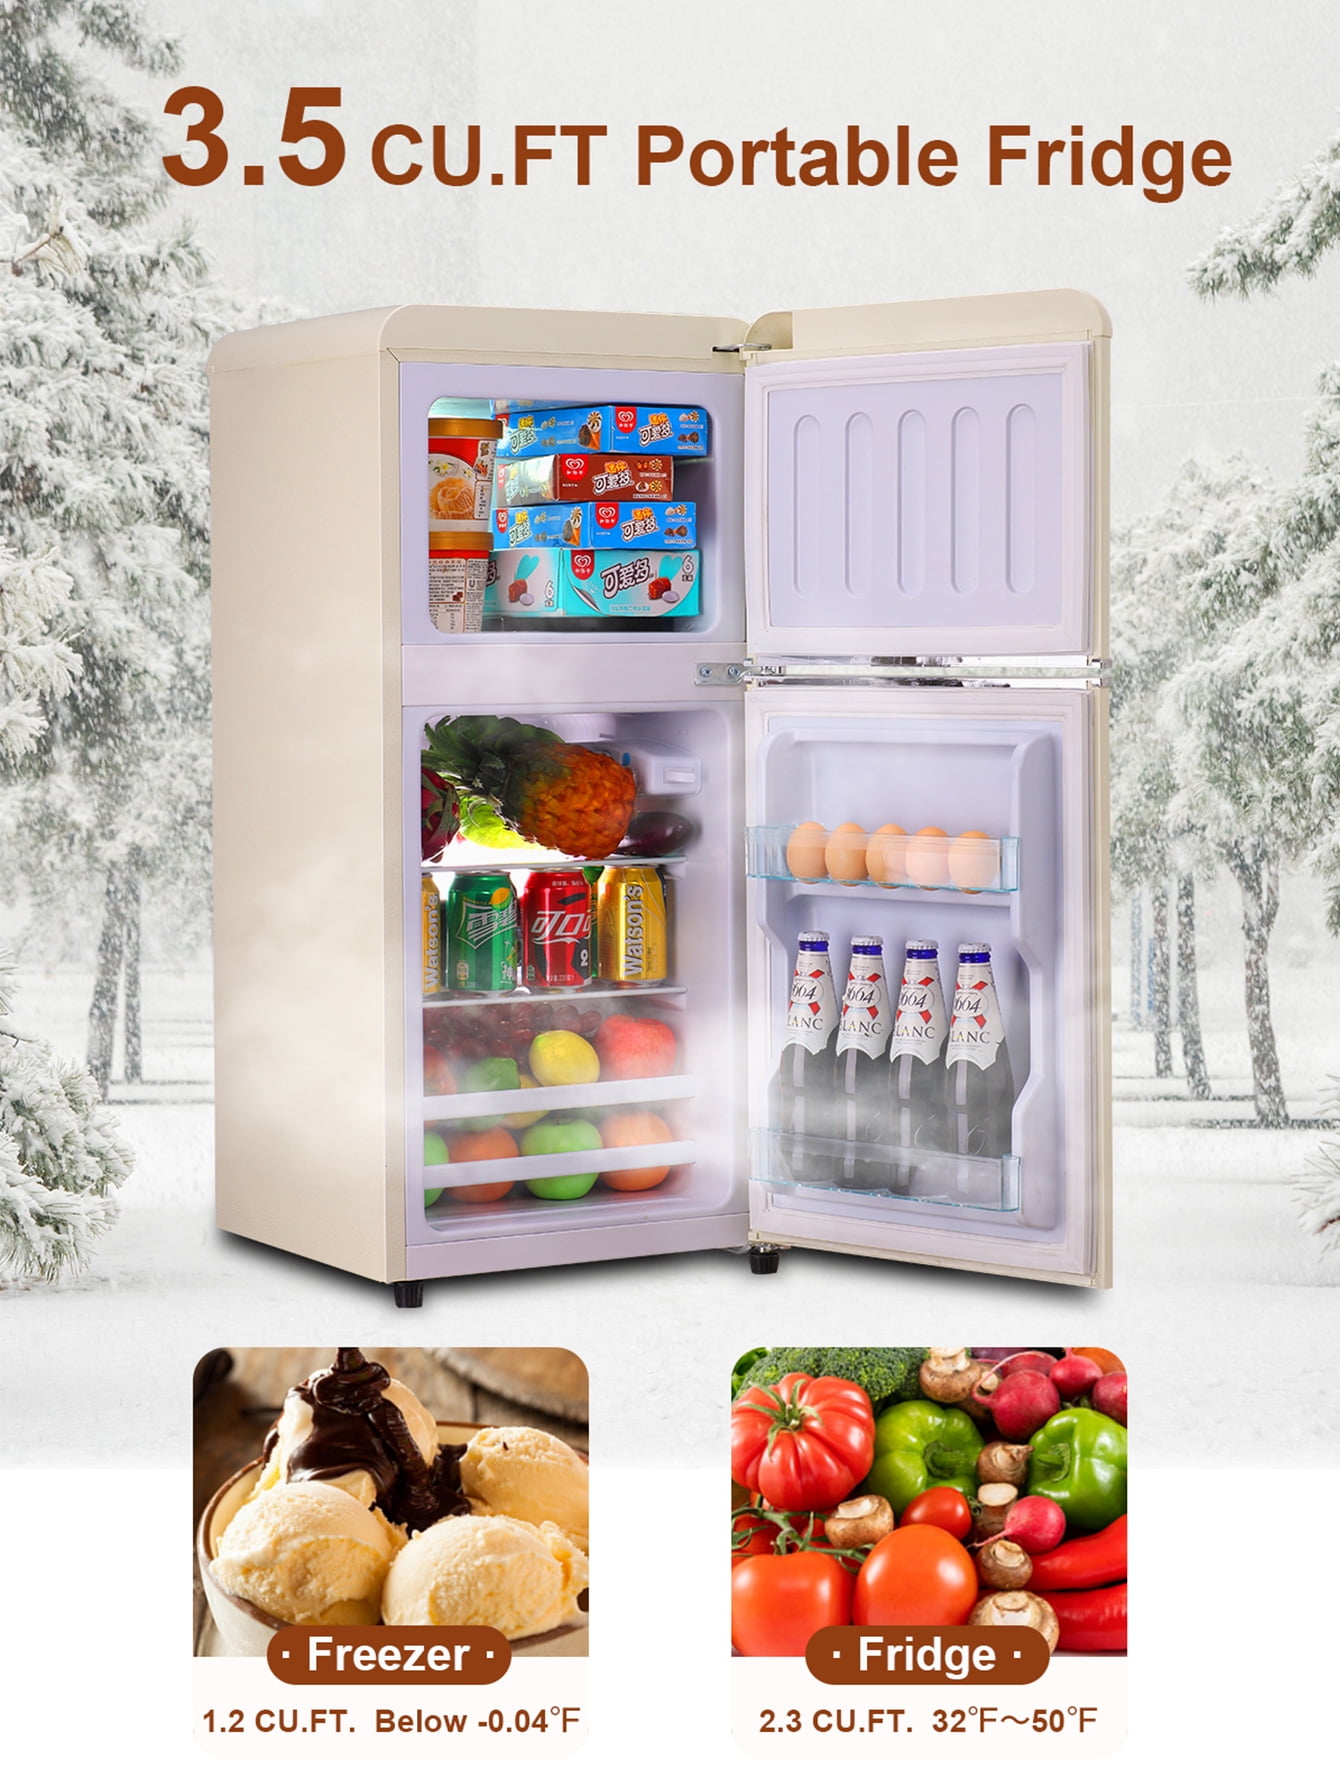 Krib Bling 35cuft Compact Refrigerator Mini Fridge with Freezer Small Refrigerator with 2 Door 7 Level Thermostat Removable Shelves for Kitchen Dorm A